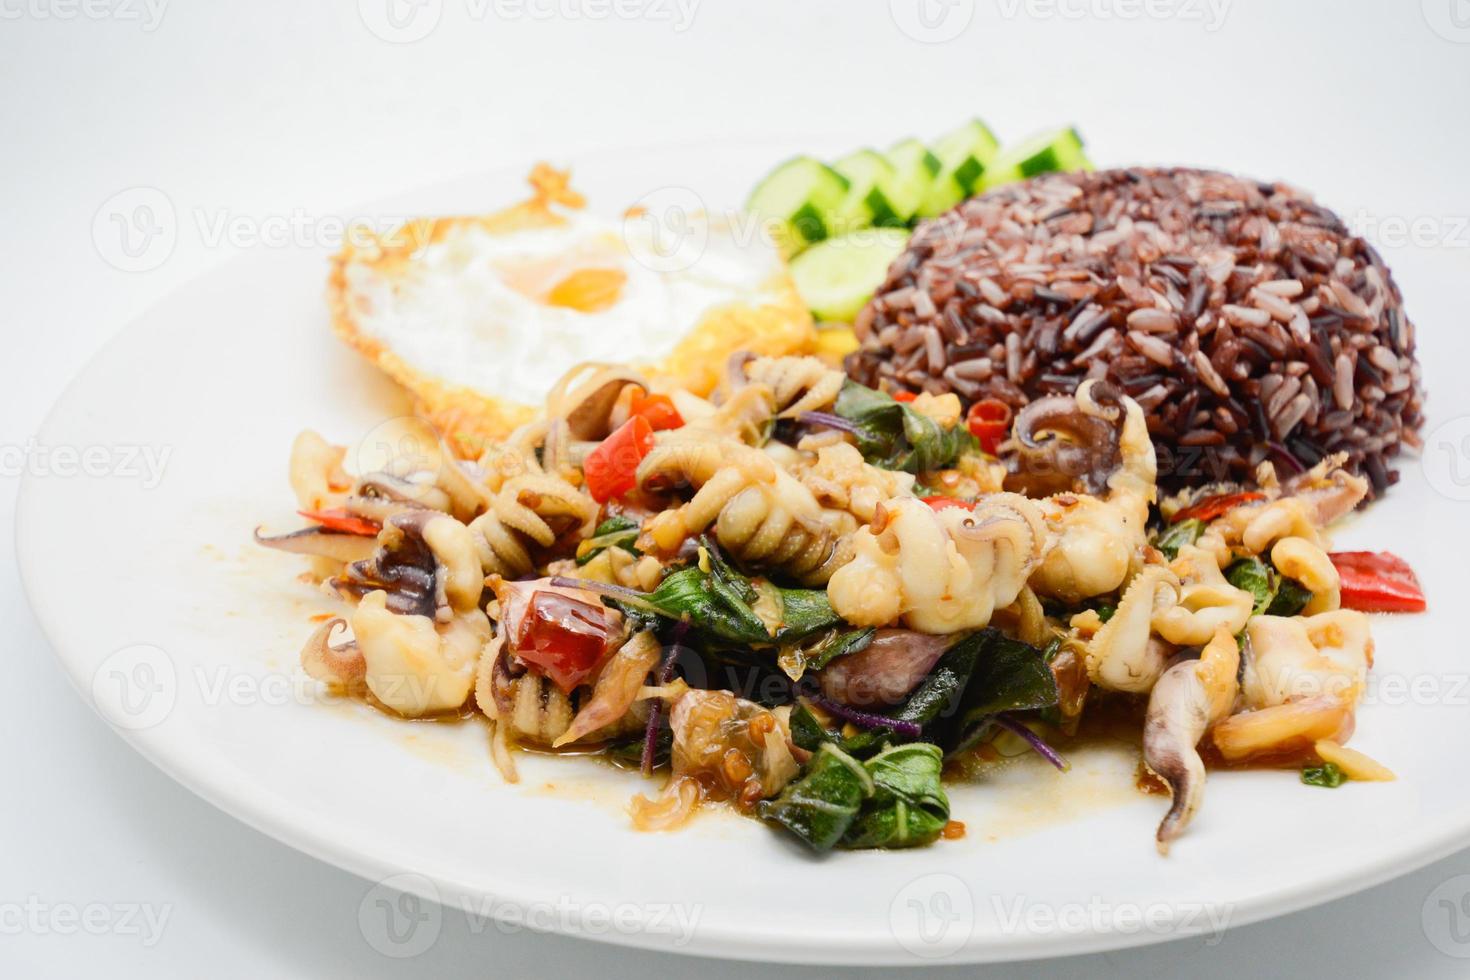 Spicy stir fried squid with basil leaves and chili, Sunny side up egg, served with brown rice. It is famous Thai food. You can change material designed and try to cook for your family. photo